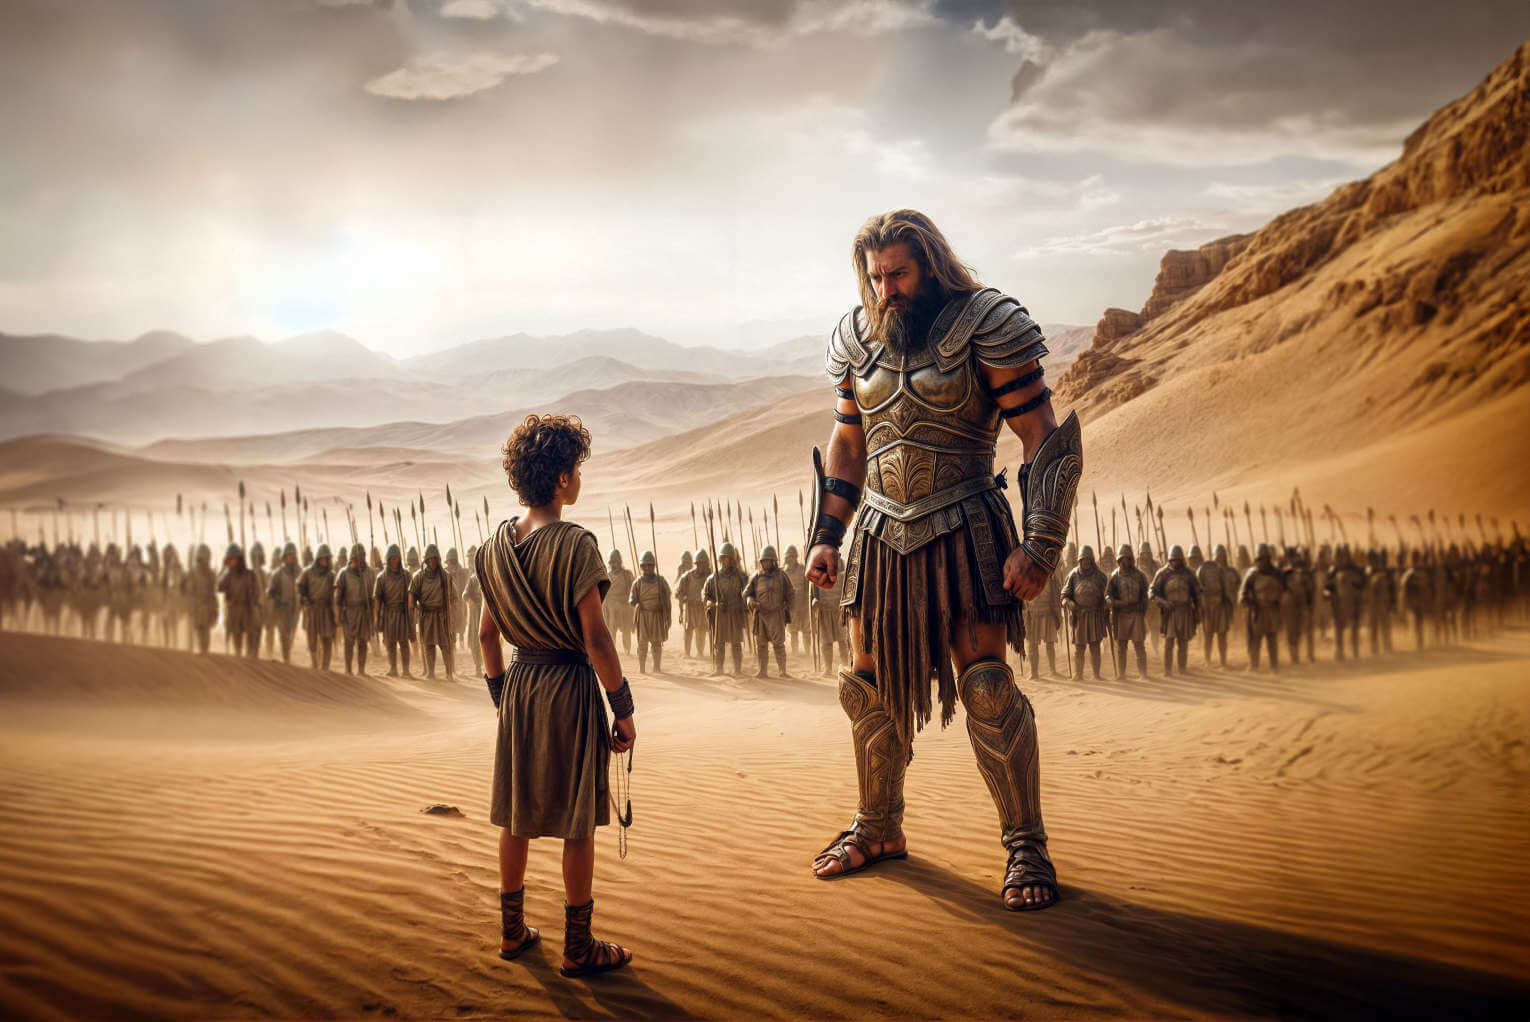 New Amazon Prime Series Casts David, Goliath, and Saul in Biblical Epic